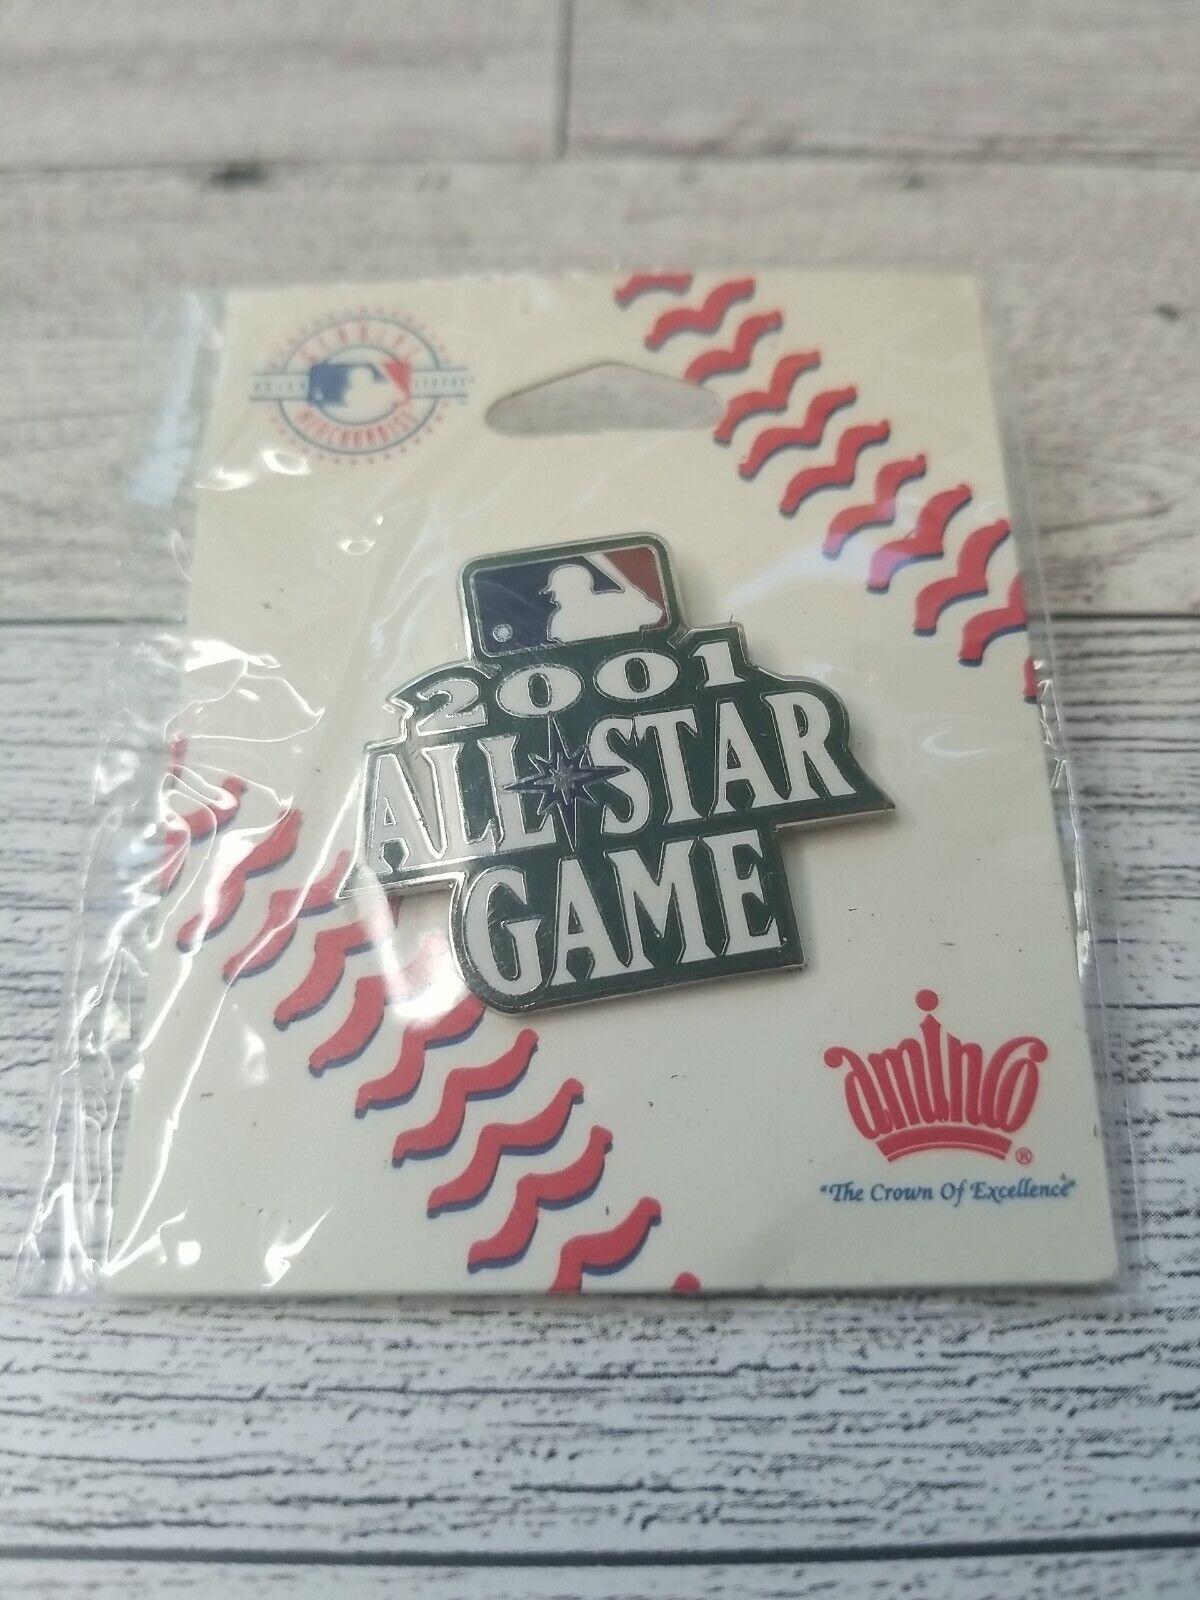 2001 MLB All Star Game Seattle Mariners Pin Collectible Vintage VTG Lapel Hat